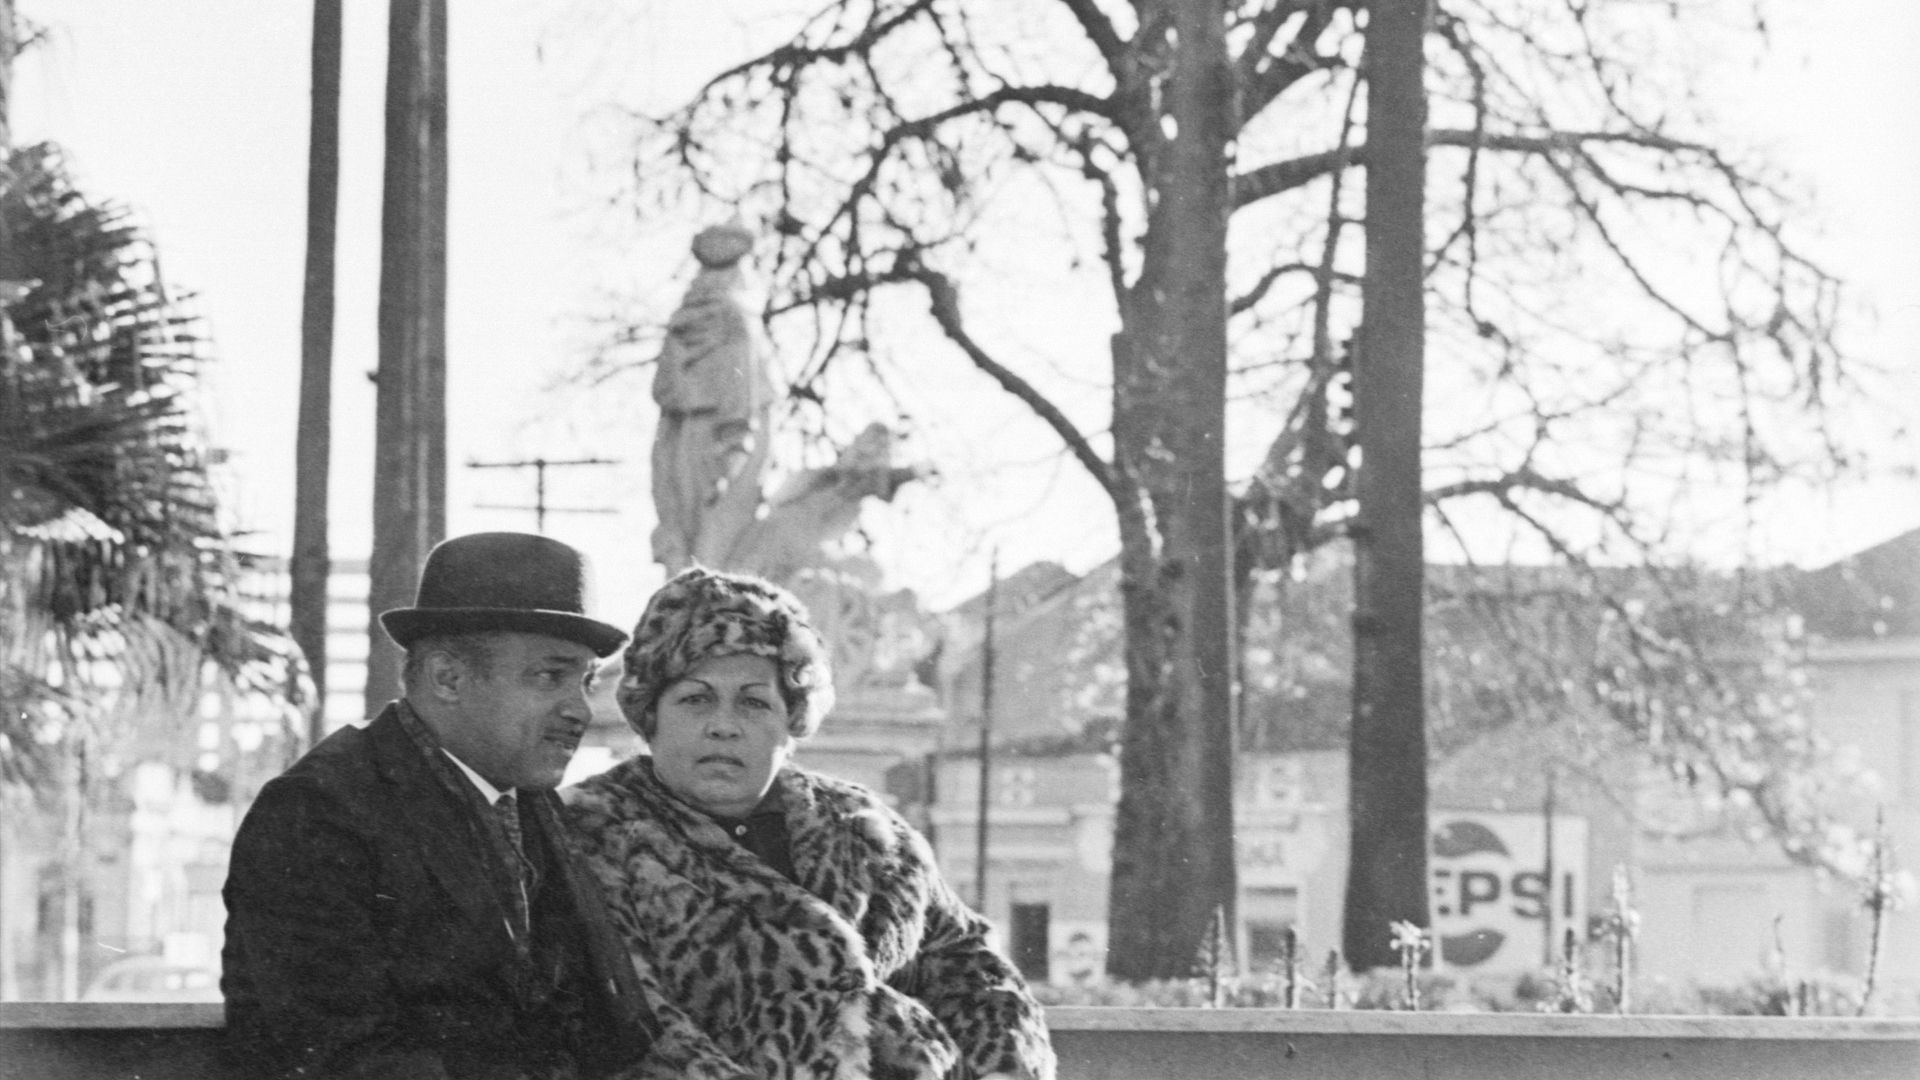 A man and woman are sitting on a bench in front of a pepsi sign.